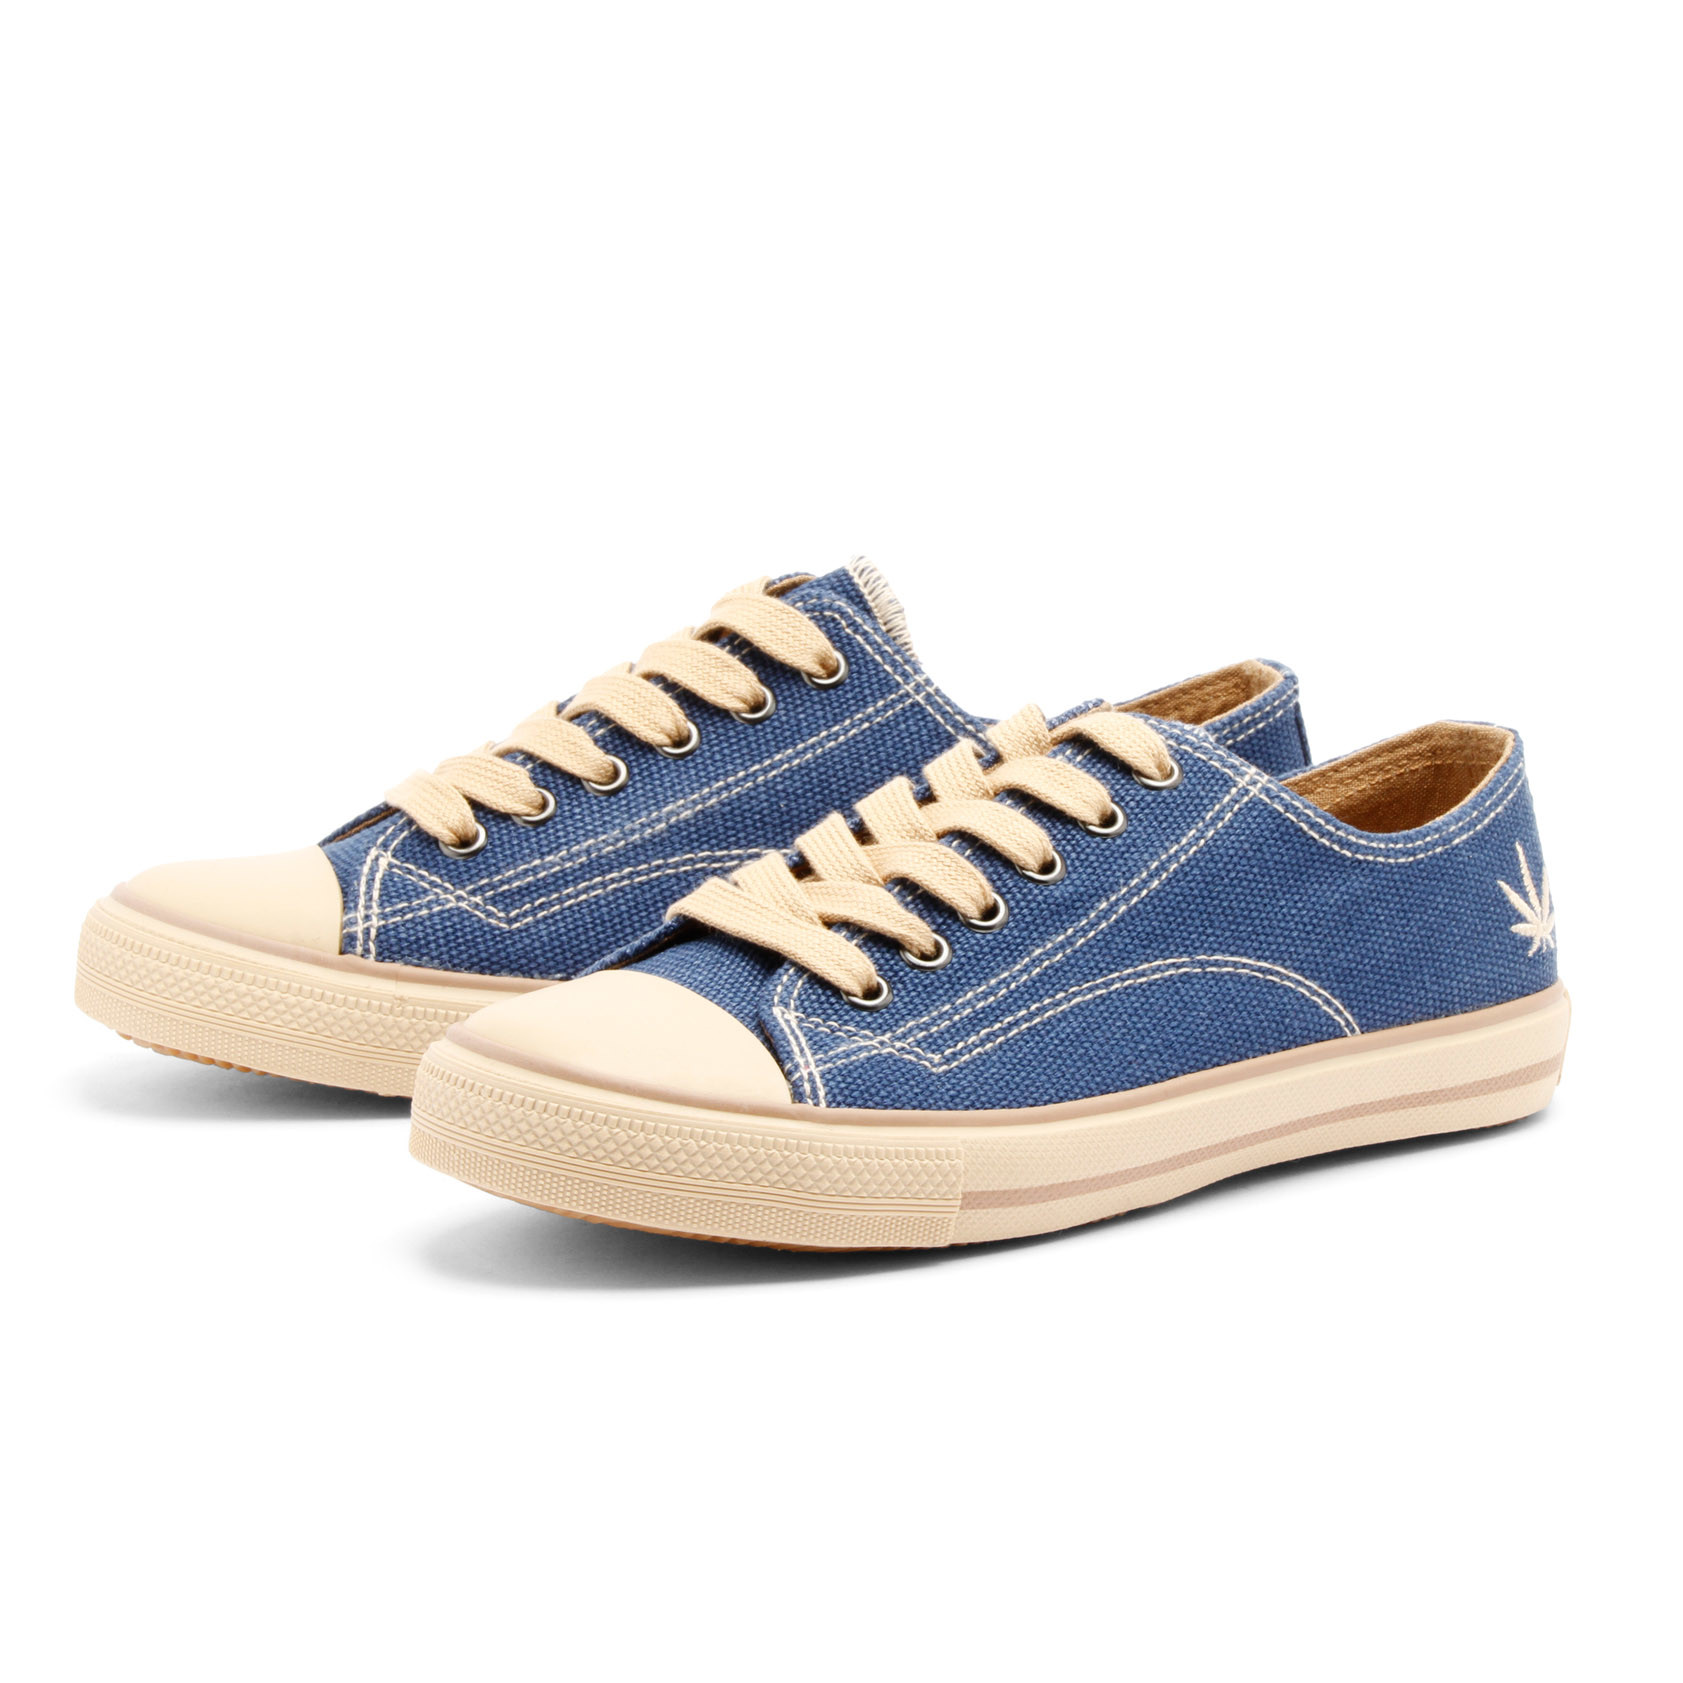 Grand Step Shoes - Marley Navy-